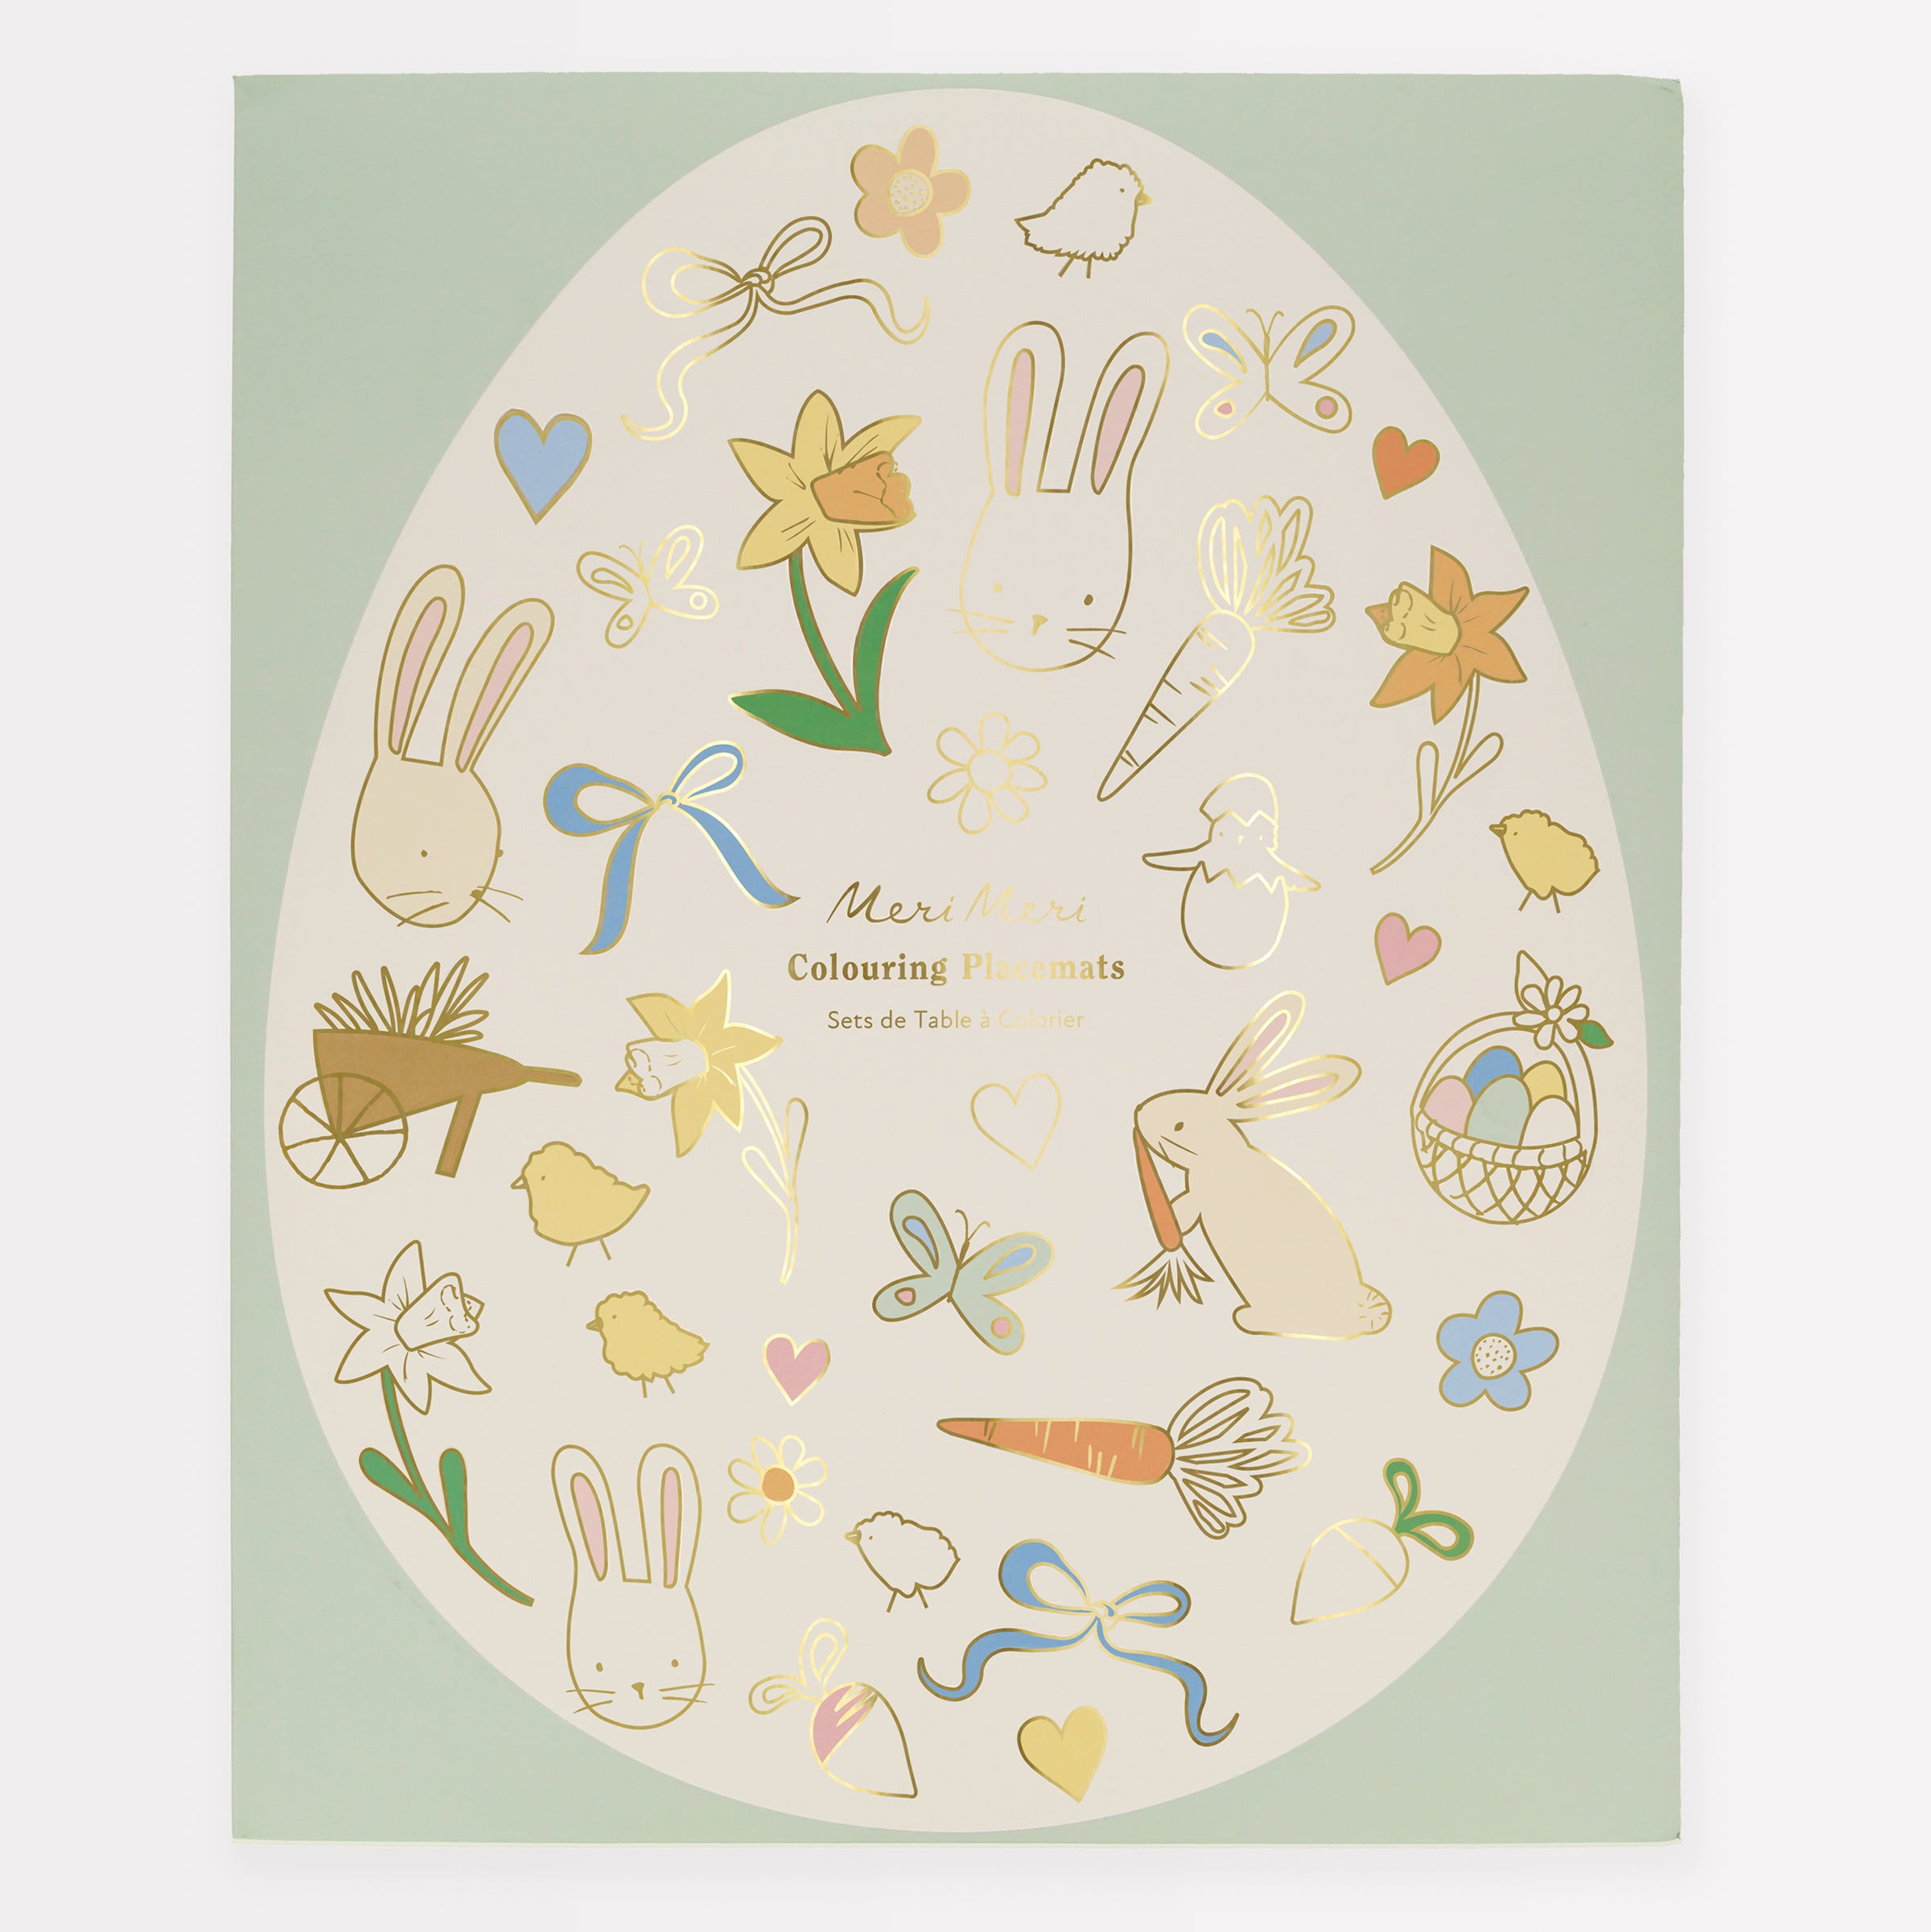 If you're looking for coloring fun for Easter, you'll love our kids placemats.